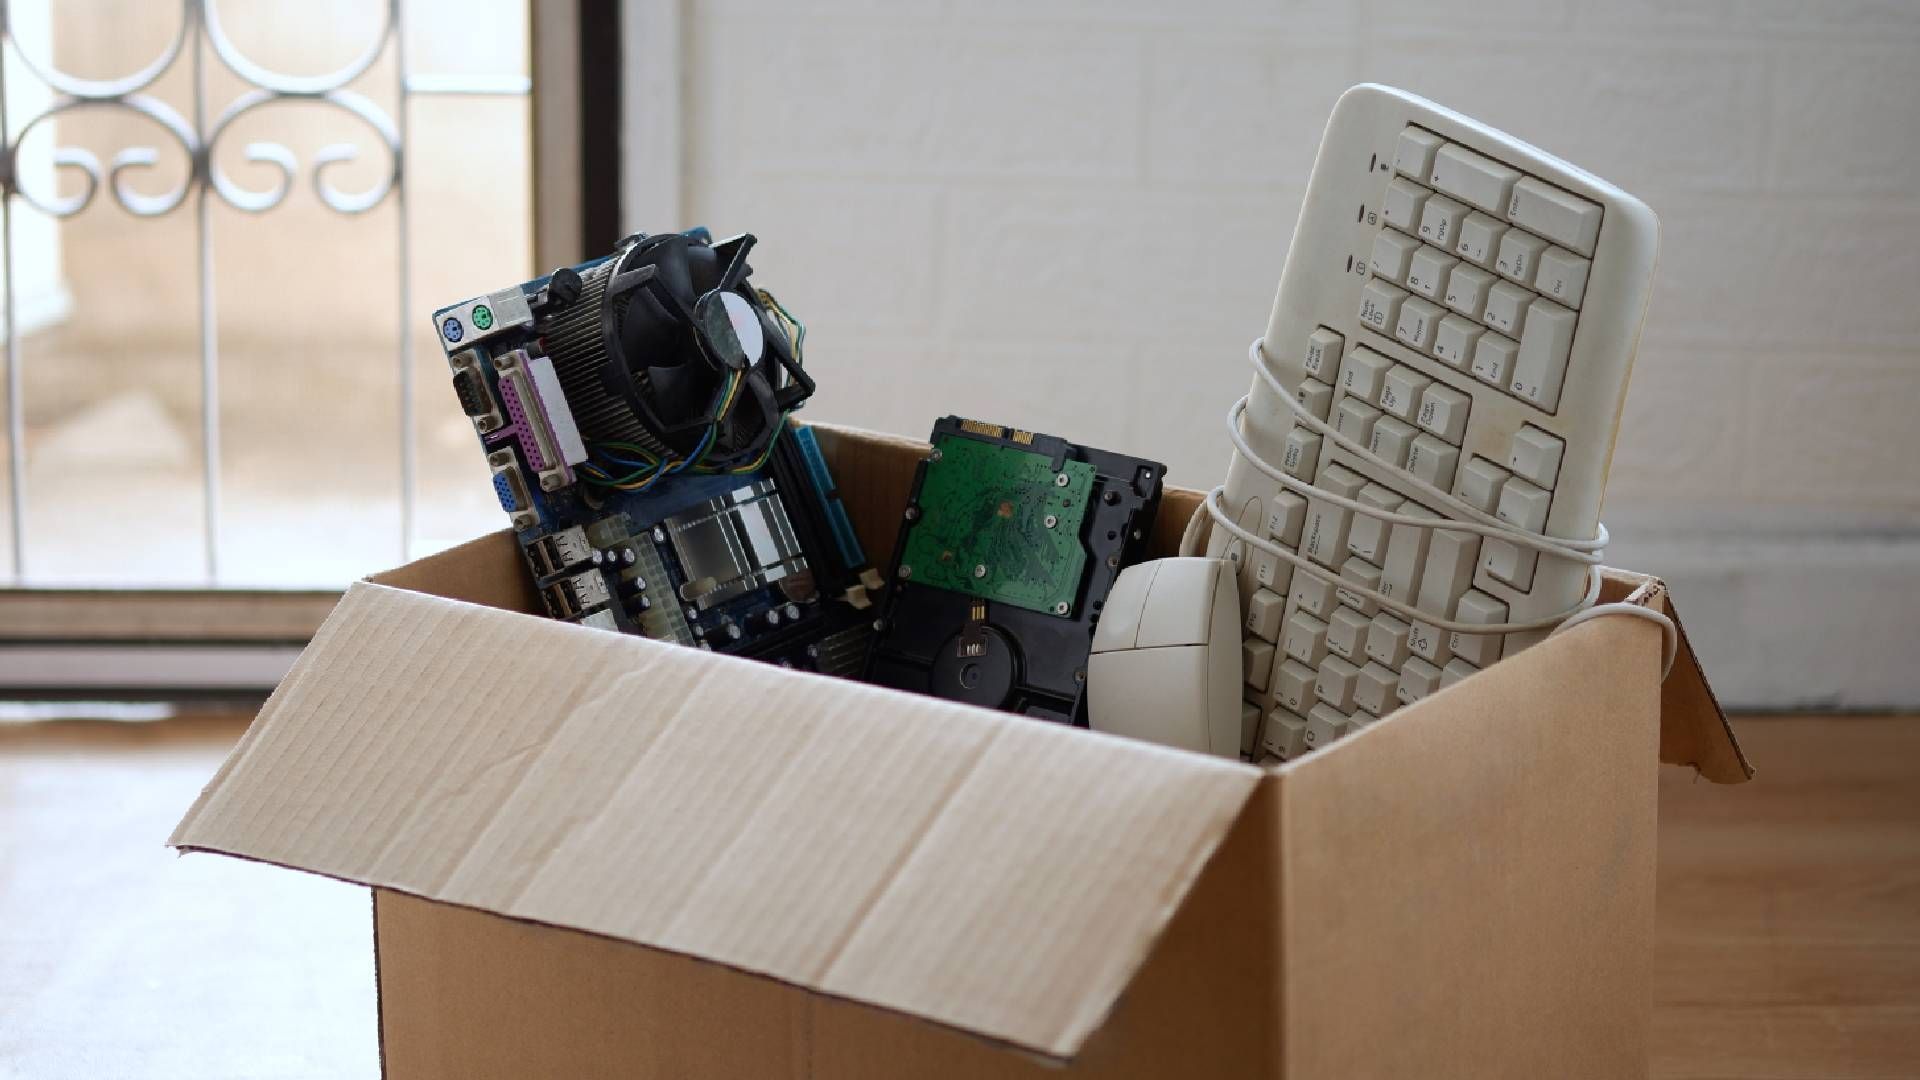 Old electronic equipment in a box ready to drop off for media destruction near Lexington, Kentucky (